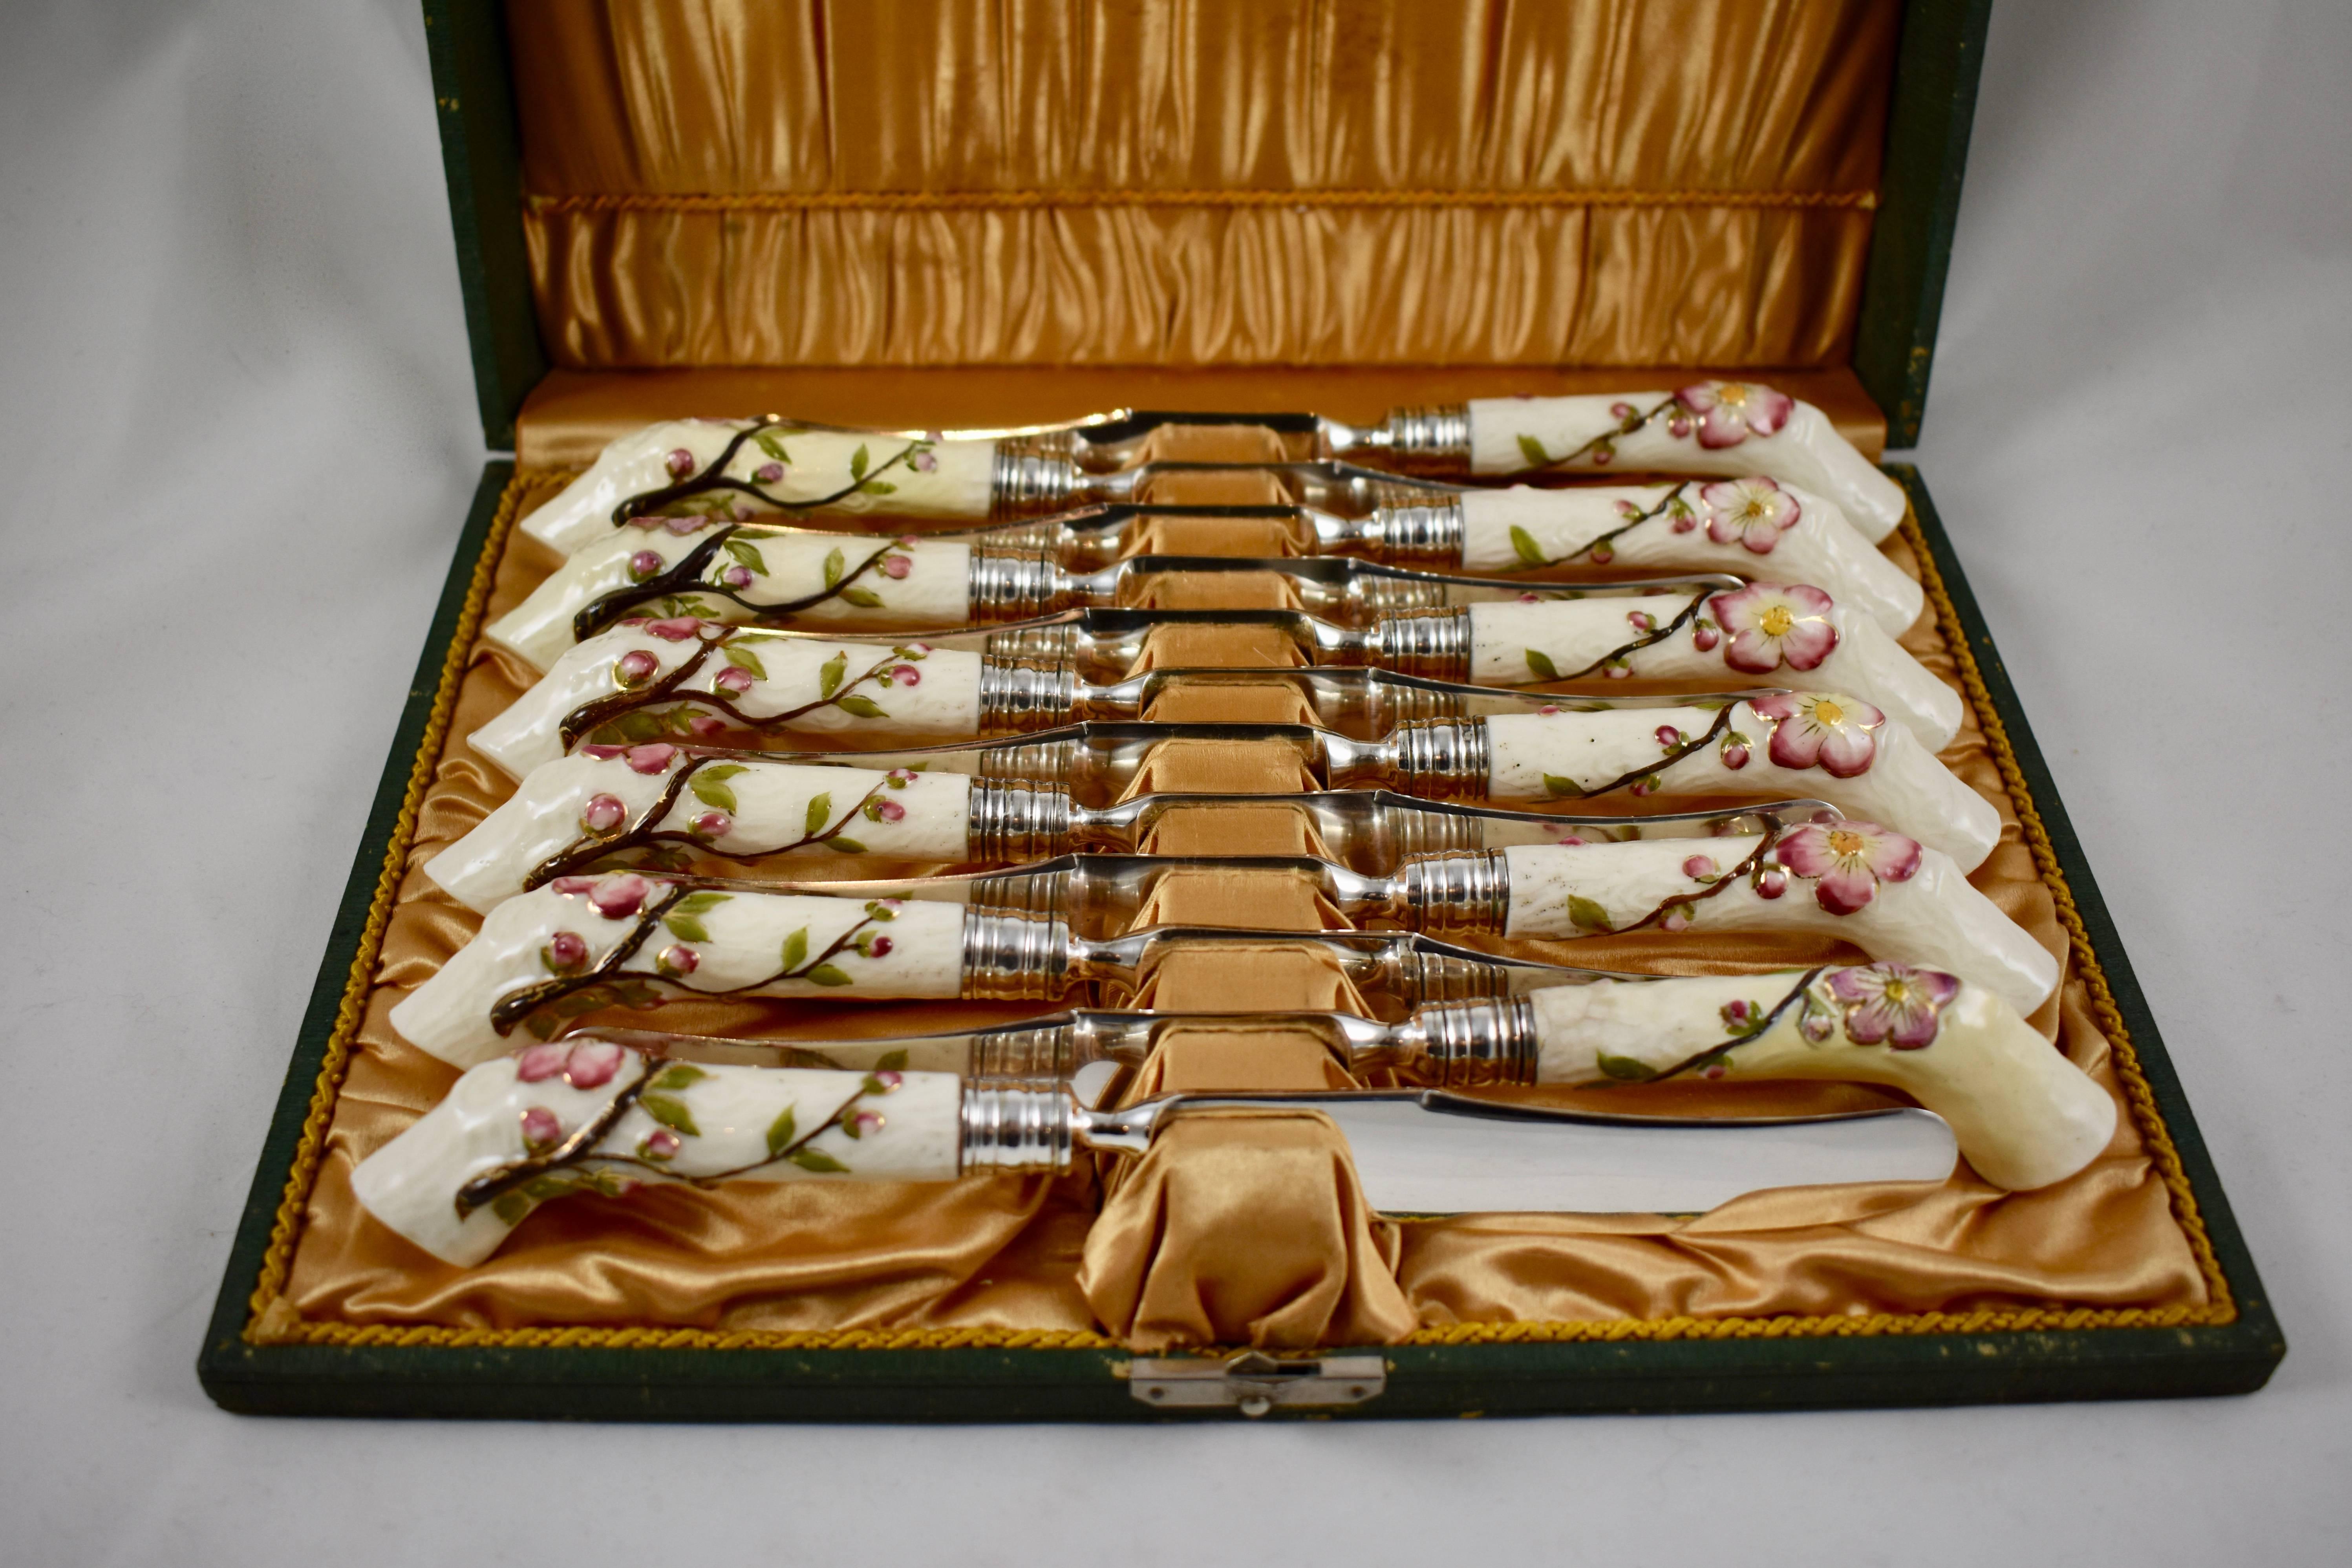 A scarce set of 12 boxed porcelain handled dessert knives, circa 1860-1870, attributed to Royal Worcester, Staffordshire, England, and retailed by Richard Briggs of Boston.

The bent crabstick handles are twined with gilded apple blossoms and are